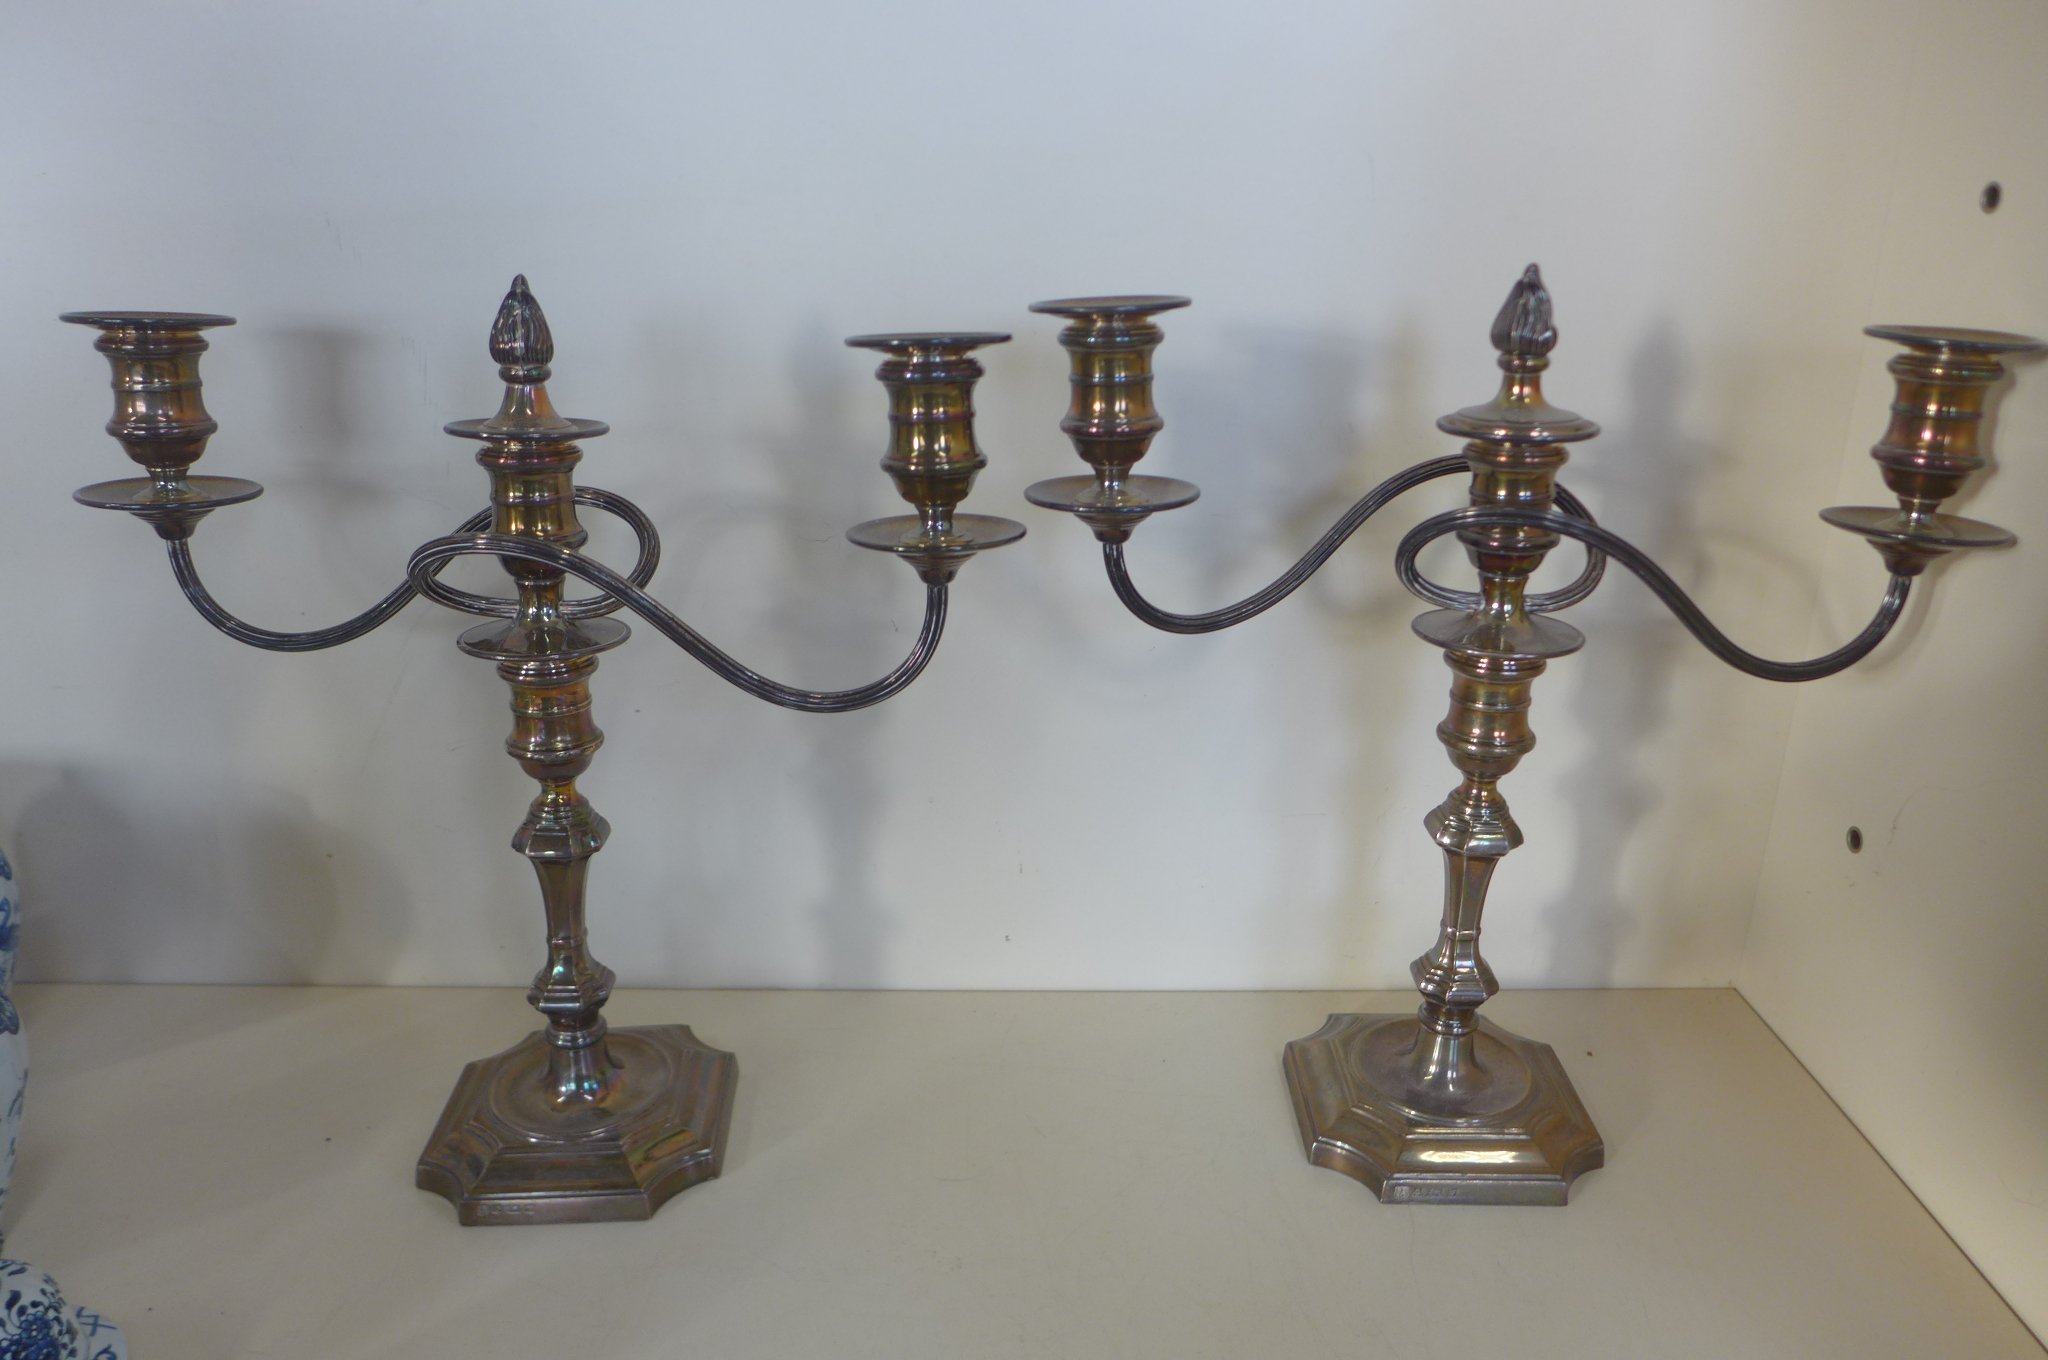 A pair of weighted silver two branch candlesticks, Birmingham 1969/70 - B E S Co - 32cm tall, both